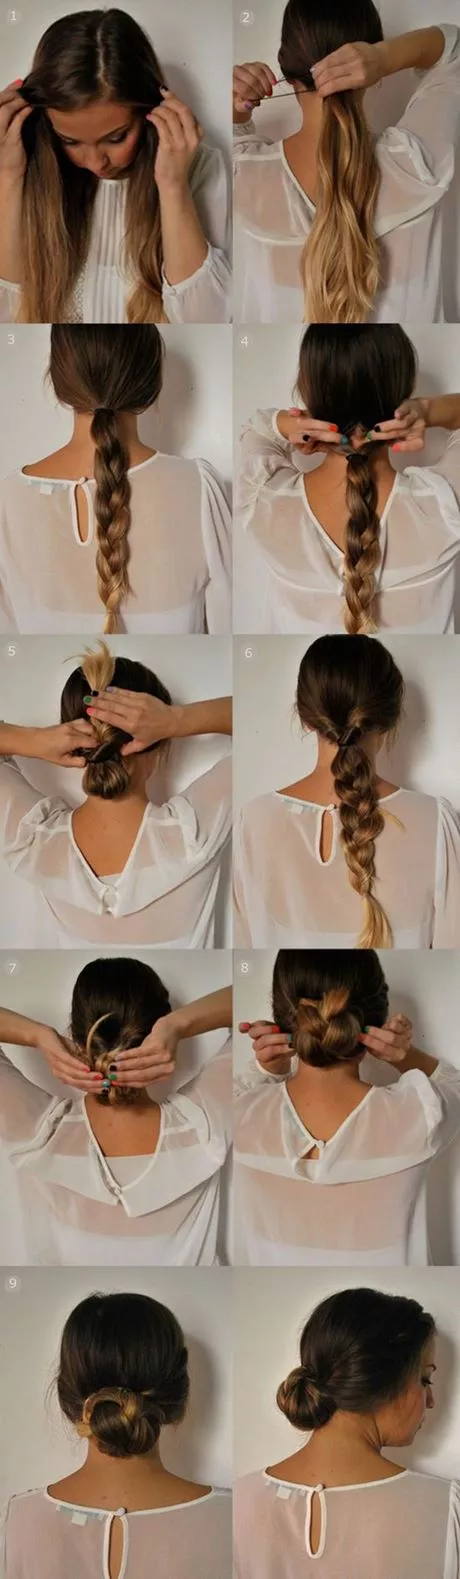 Cute hairstyles easy and fast cute-hairstyles-easy-and-fast-91_11-3-3